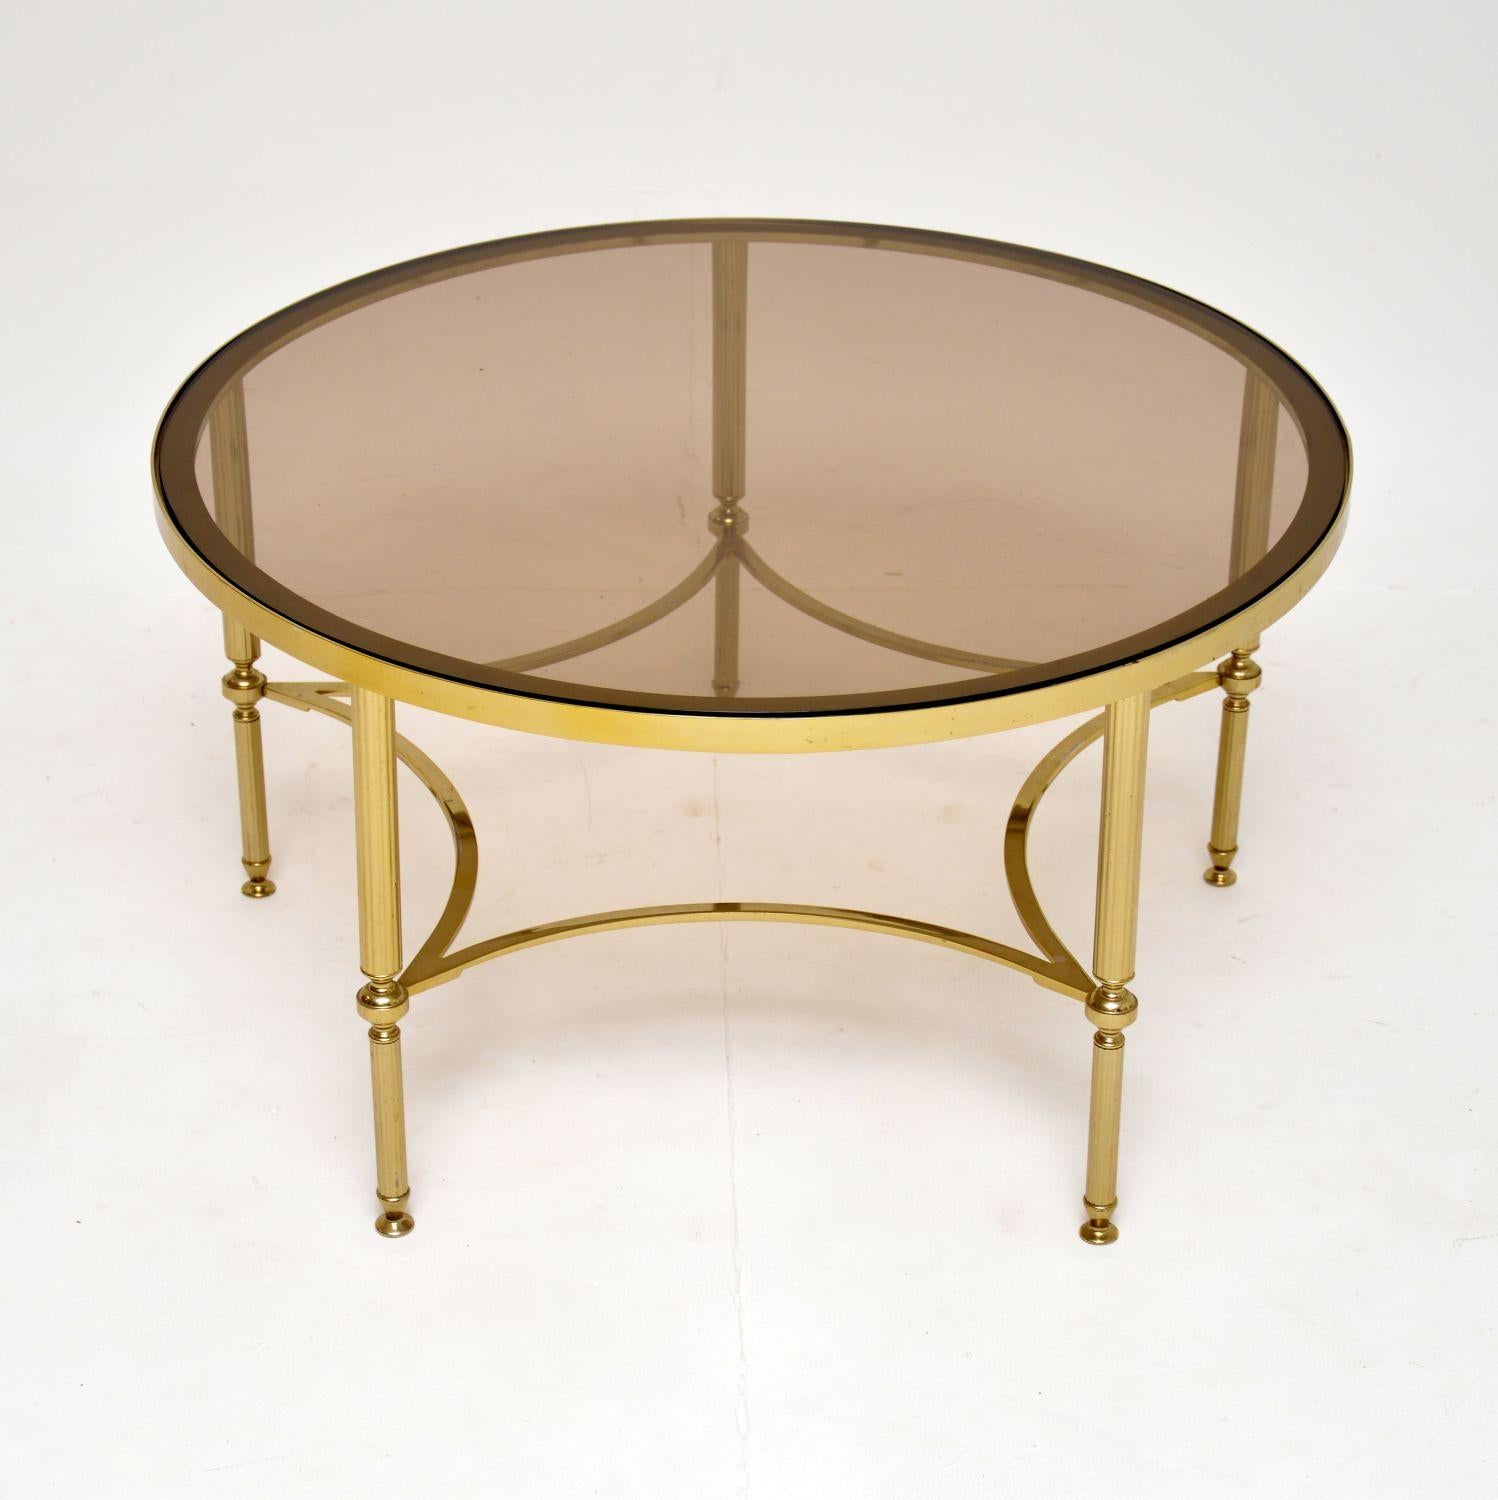 A very stylish and extremely well made 1960’s vintage French brass & glass coffee table.

It is a lovely size, the circular top has inset glass and sits of five fluted legs joined together by stretchers.

The condition is excellent for its age, with